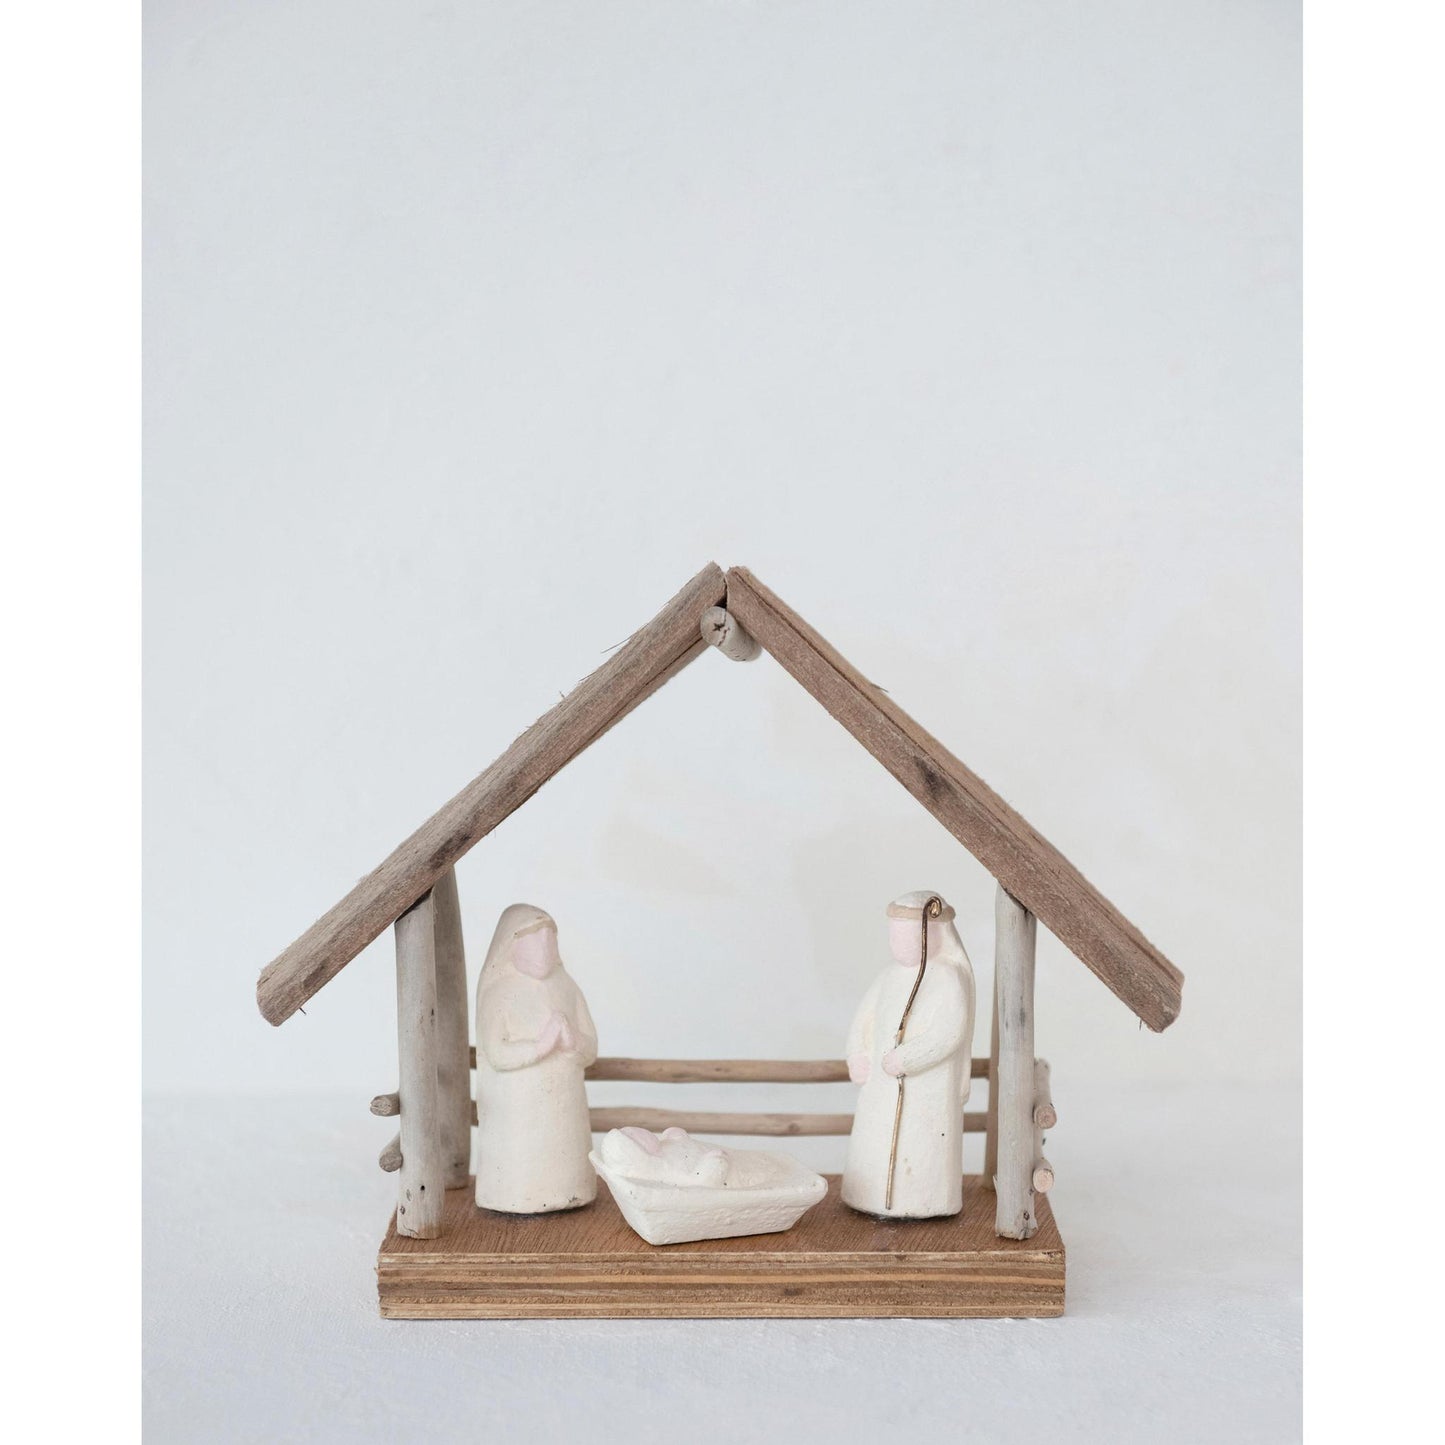 Driftwood and Paper Mache Nativity